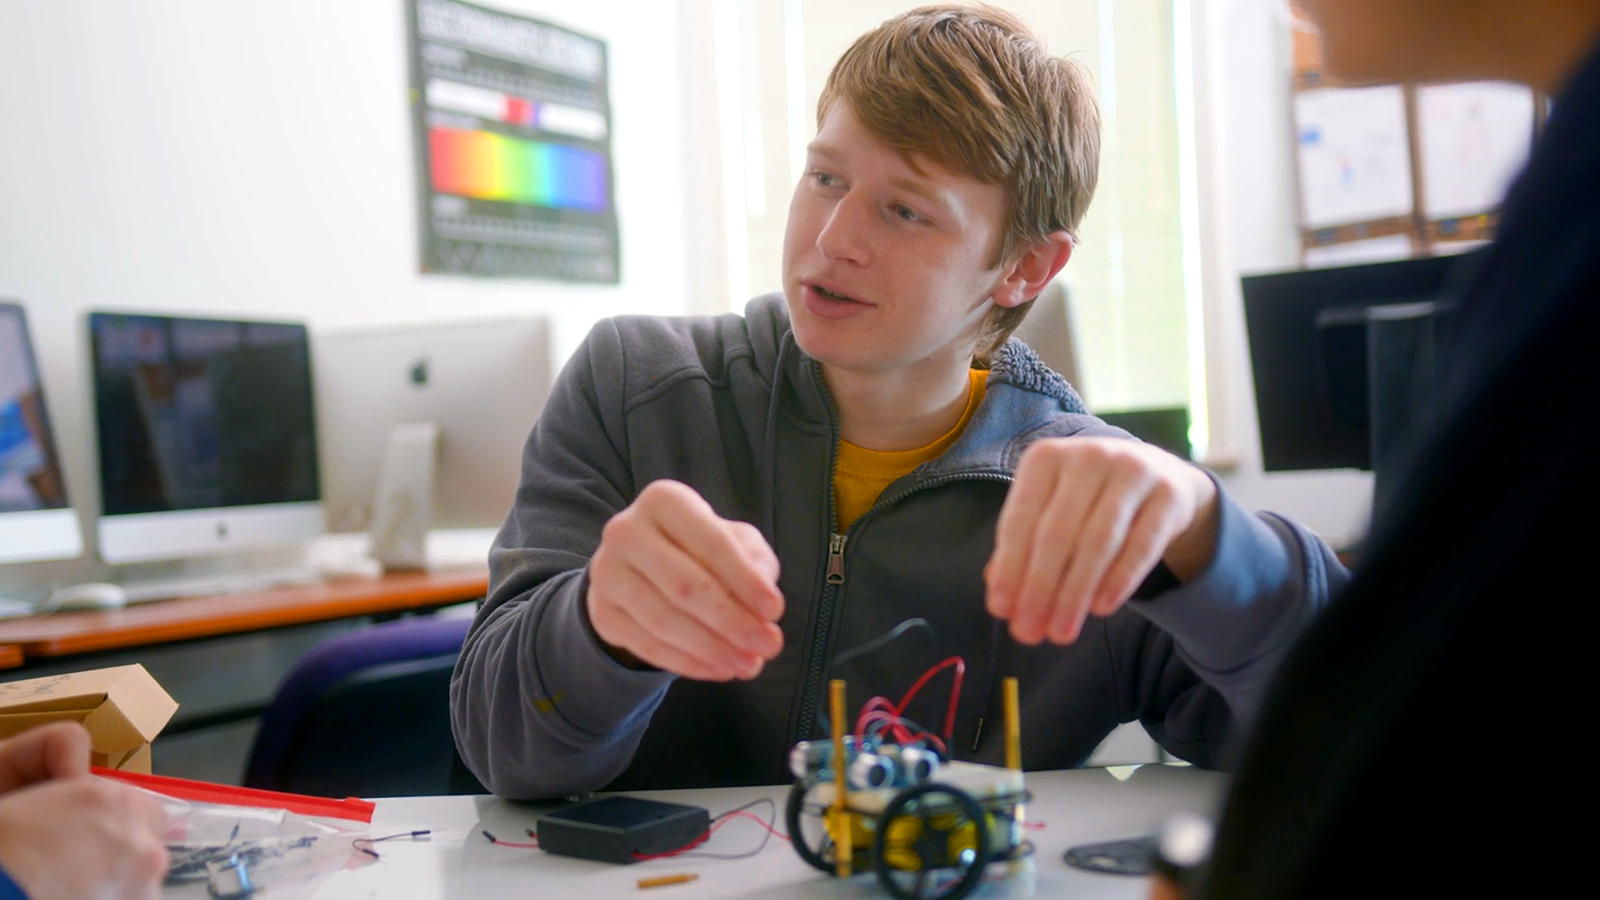 A student collaborates at a table with a robotics project in front of him in this still image from Opportunity Education's video on the power of focused skill development